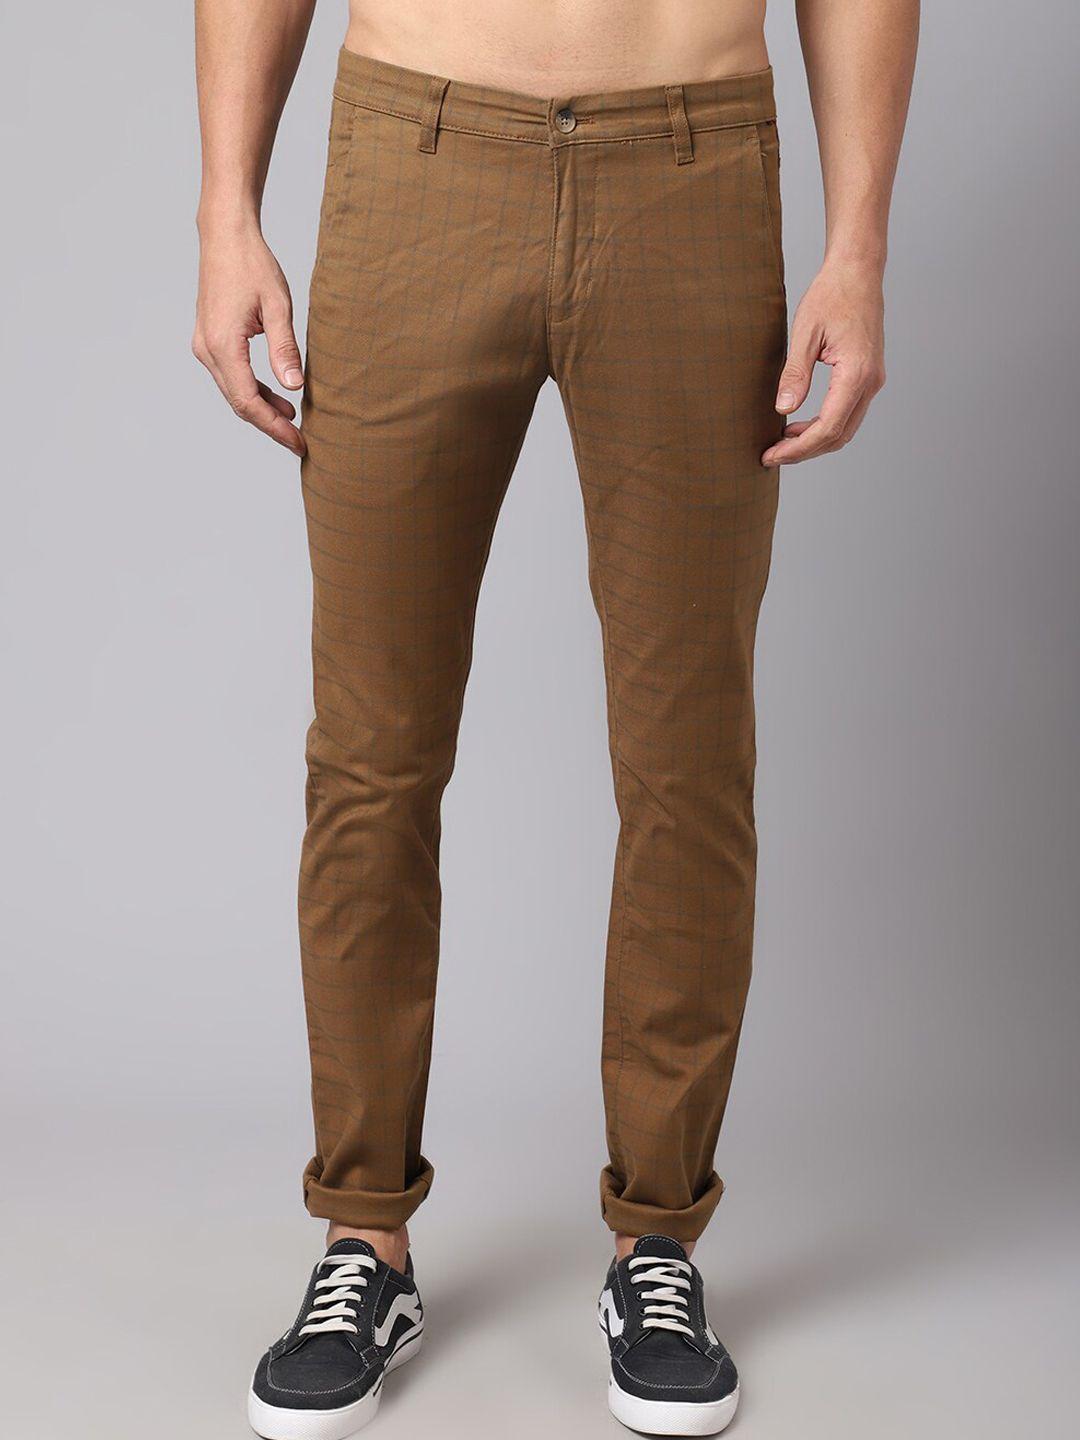 cantabil men brown chinos cotton trousers